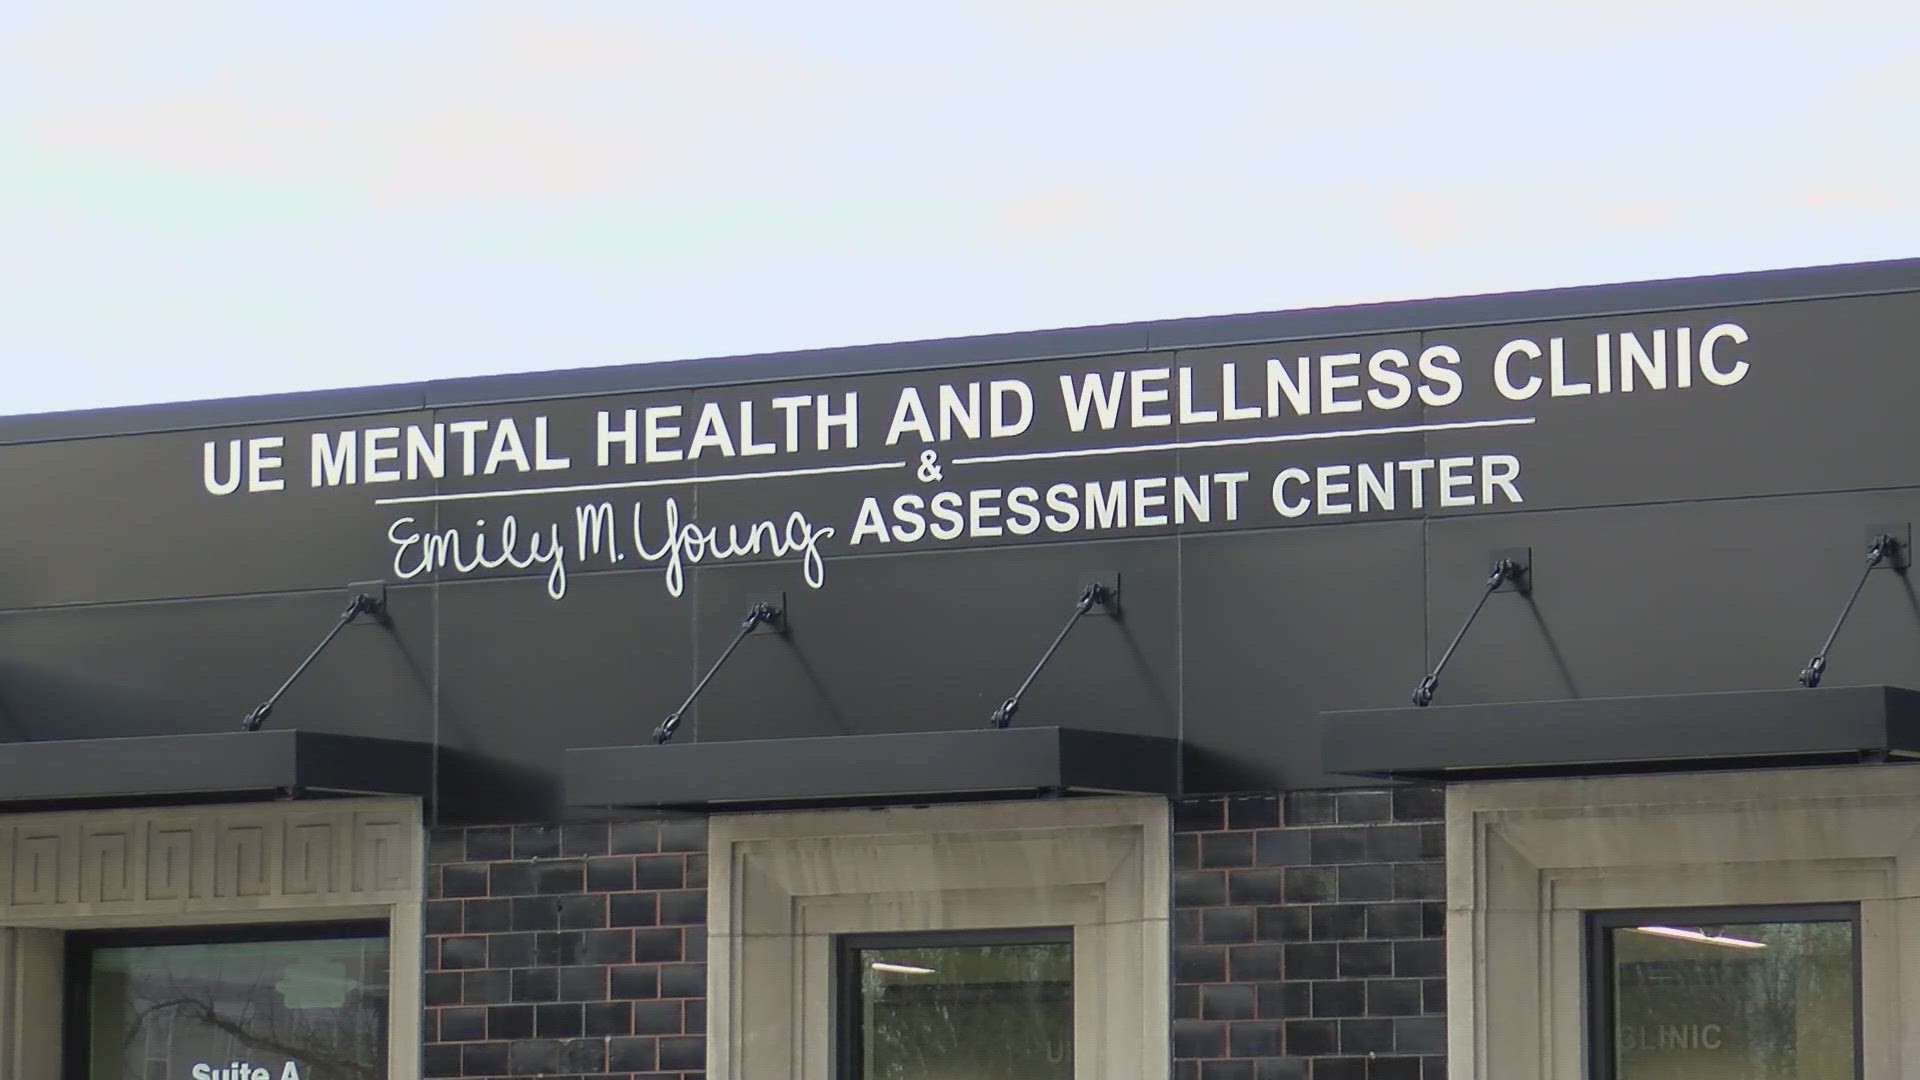 The goal in Evansville is to address mental health not only on campus but in the community, too.